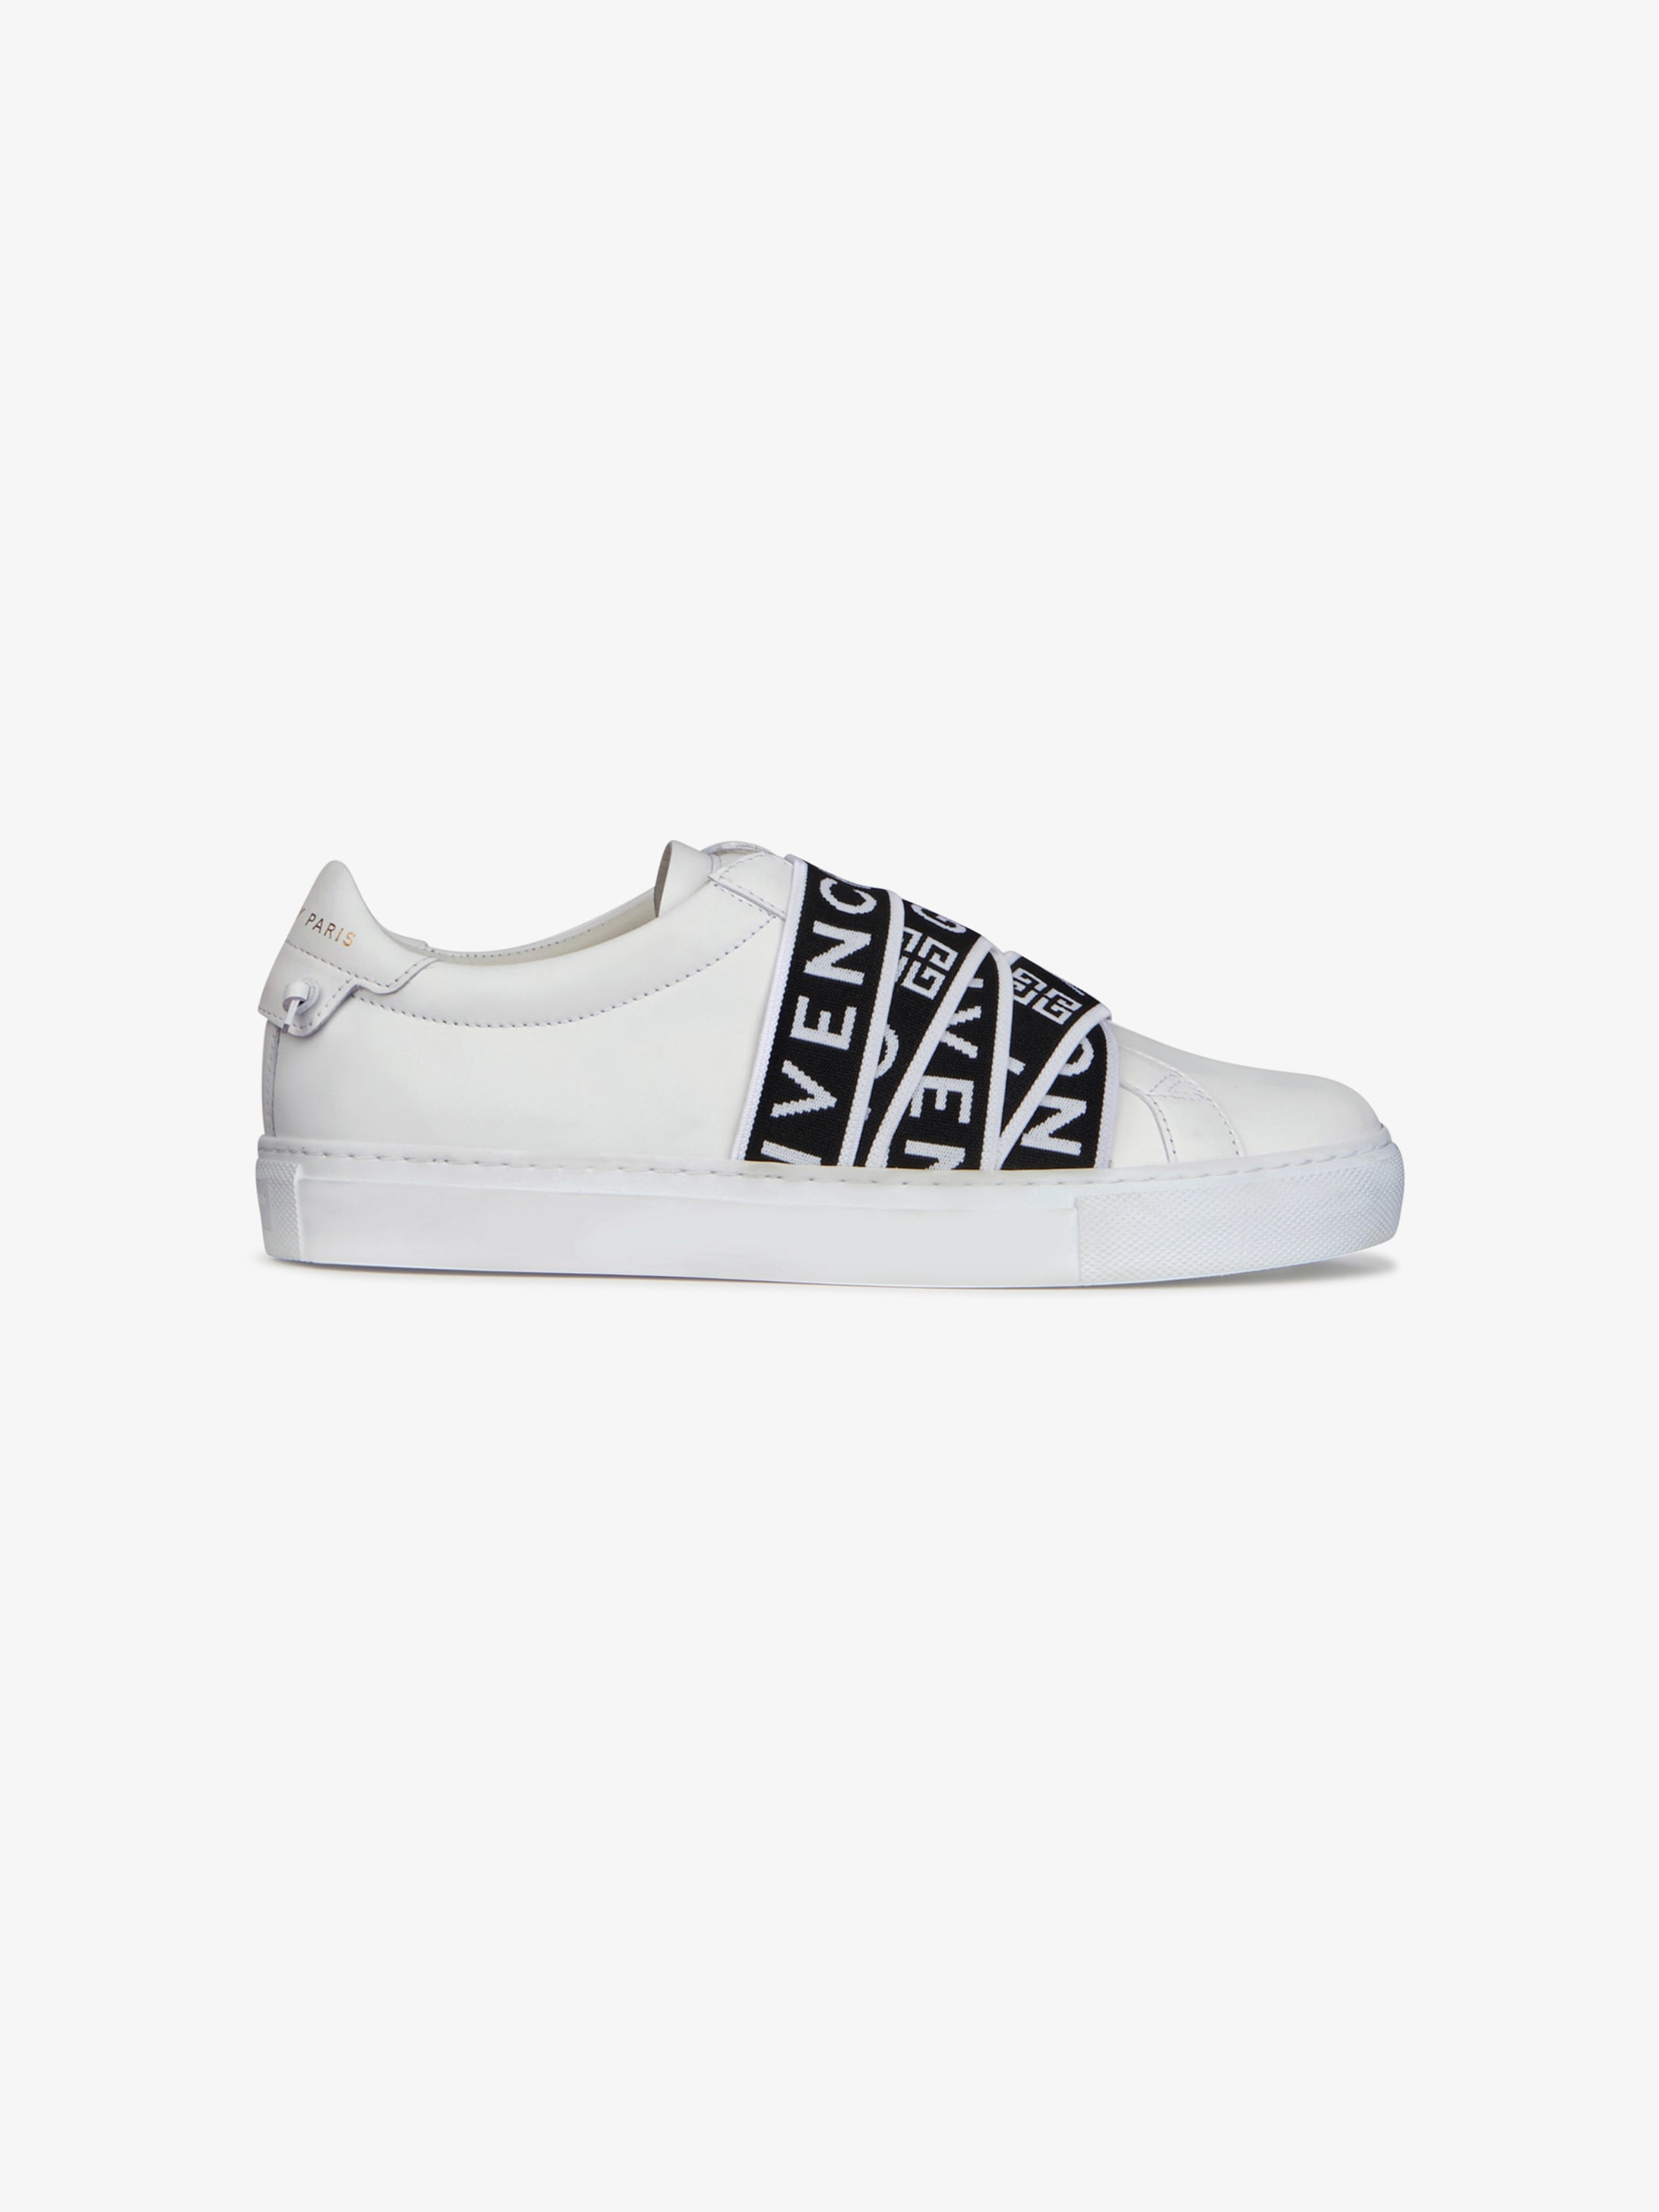 givenchy webbing sneakers